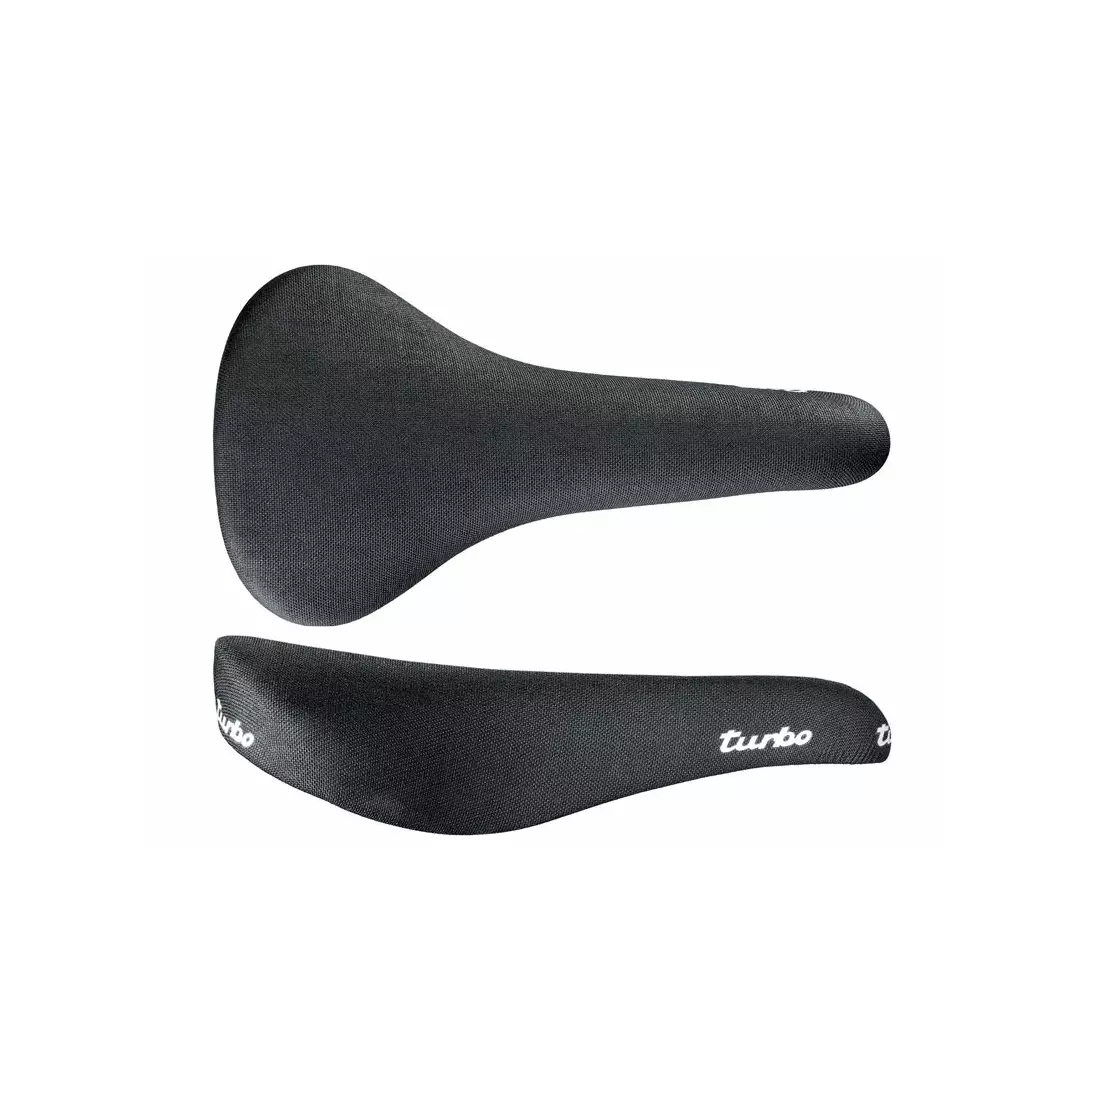 SELLE ITALIA turbo bicycle saddle 1980 woven (id match-L1) 295g black SIT-051A001HEC001